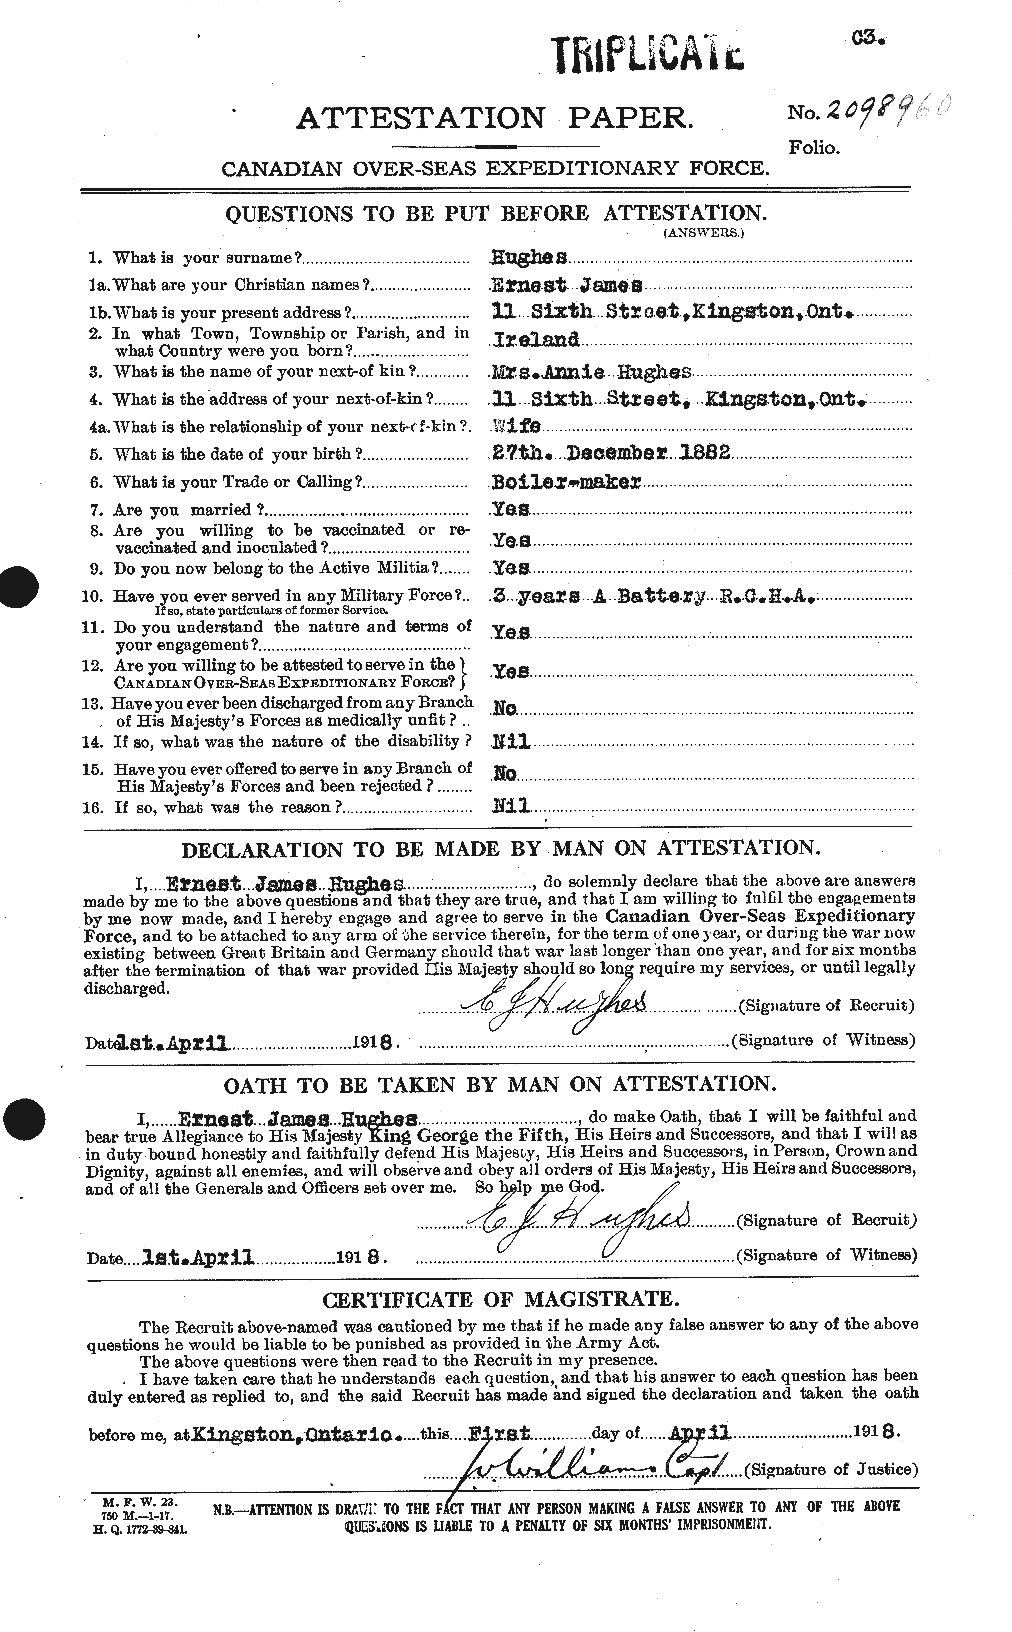 Personnel Records of the First World War - CEF 402714a